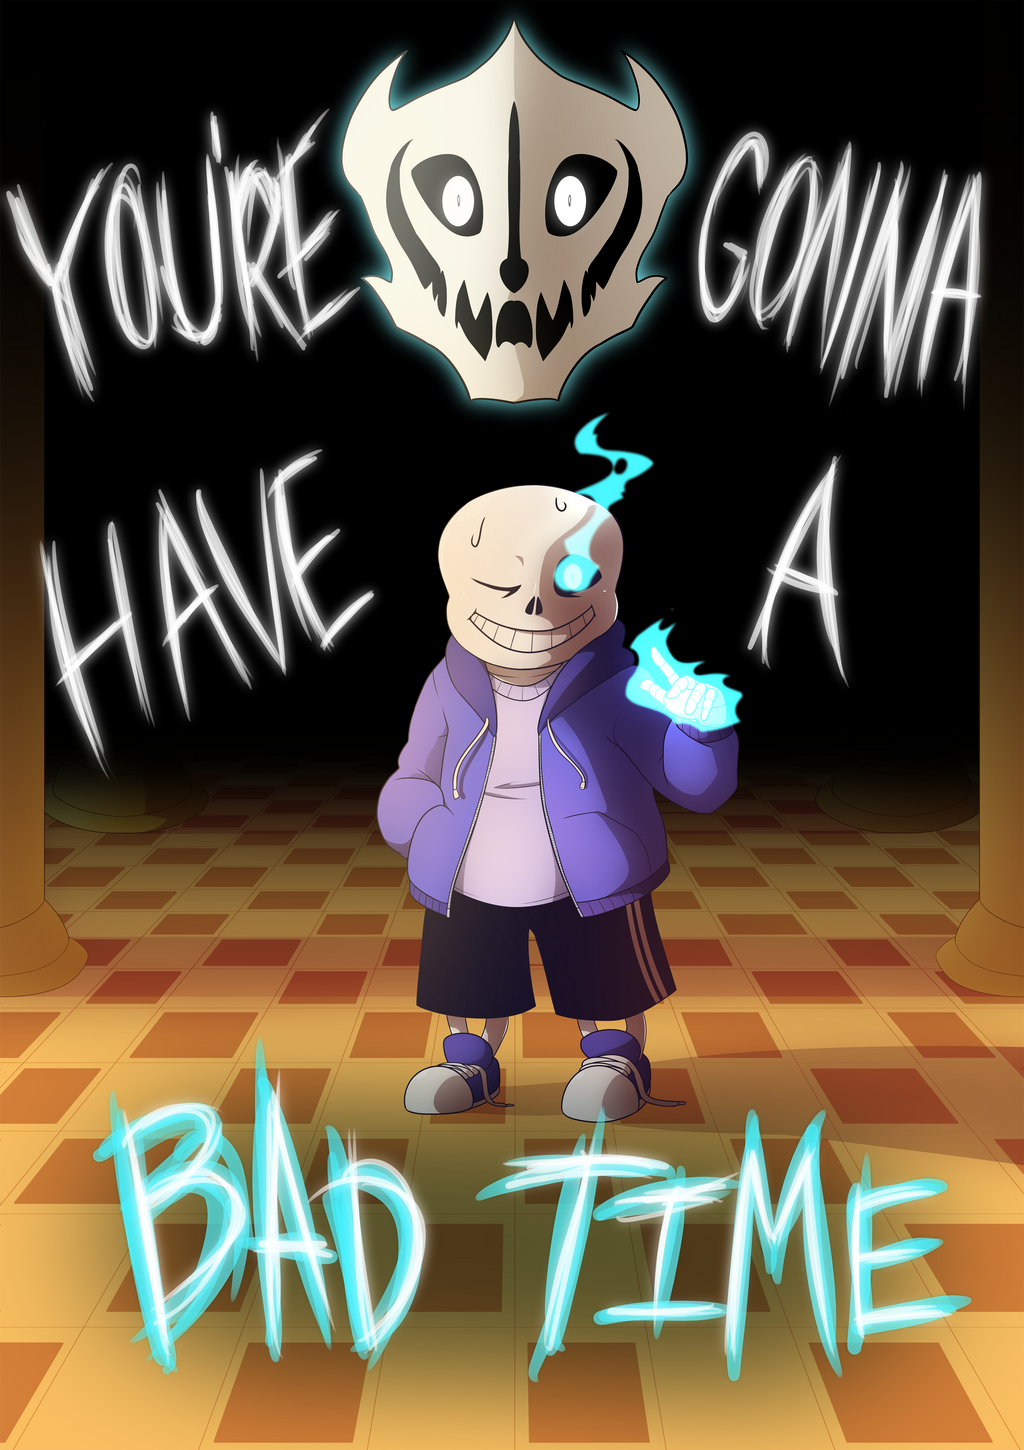 Undertale Spoilers: Bad Time by Miss-Sheepy on DeviantArt